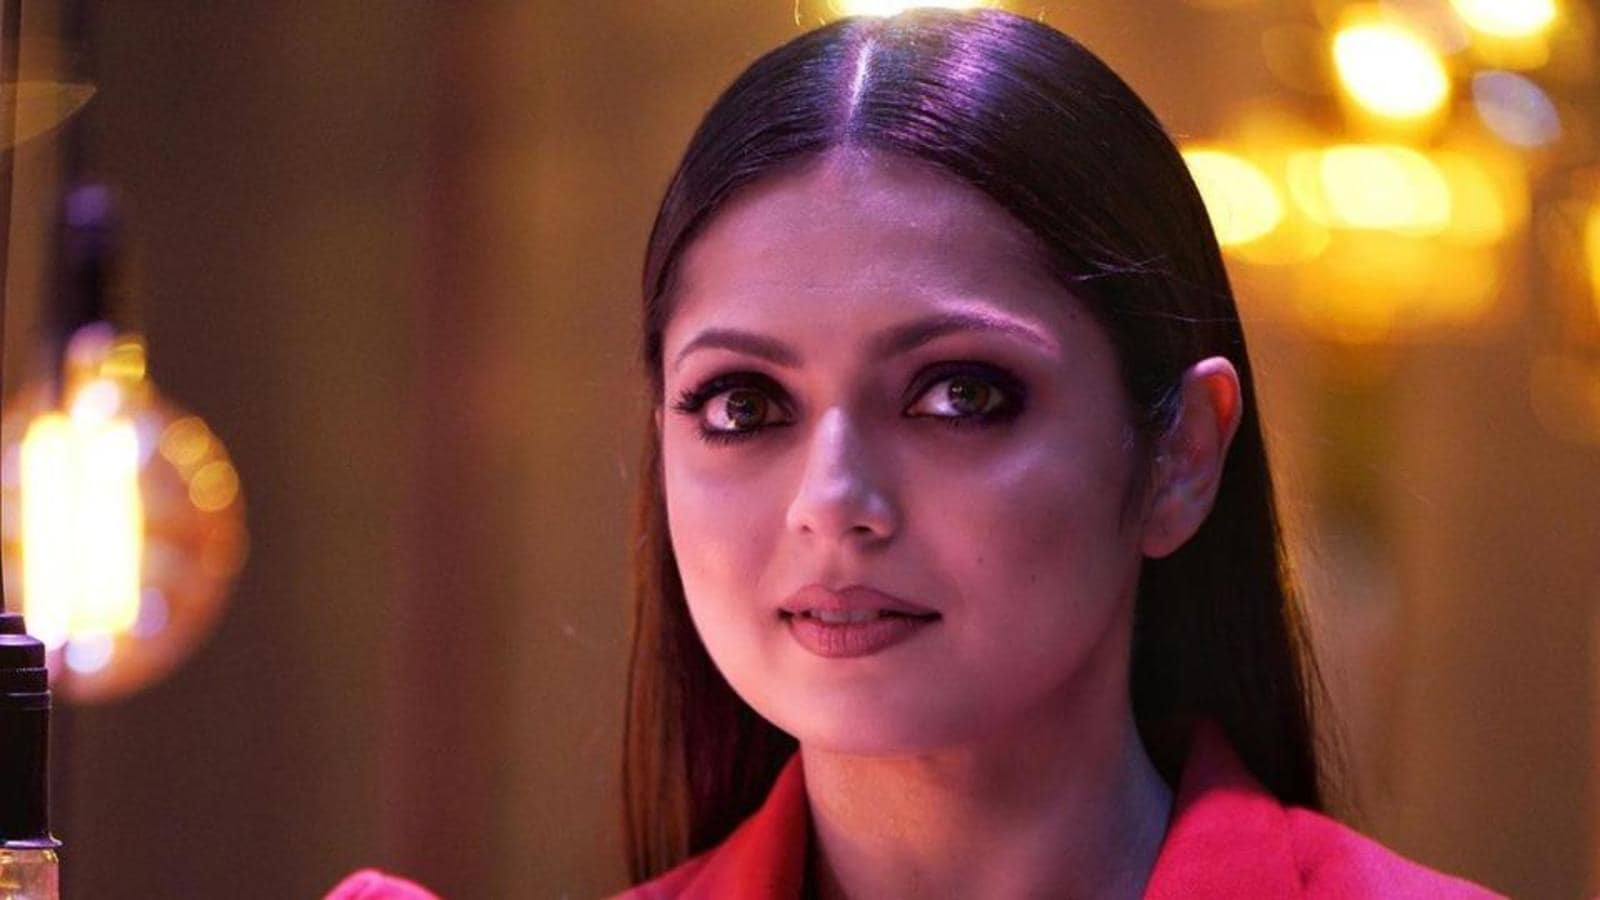 Drashti Dhami Boyfriend: Is the Actress Dating or is she Married?